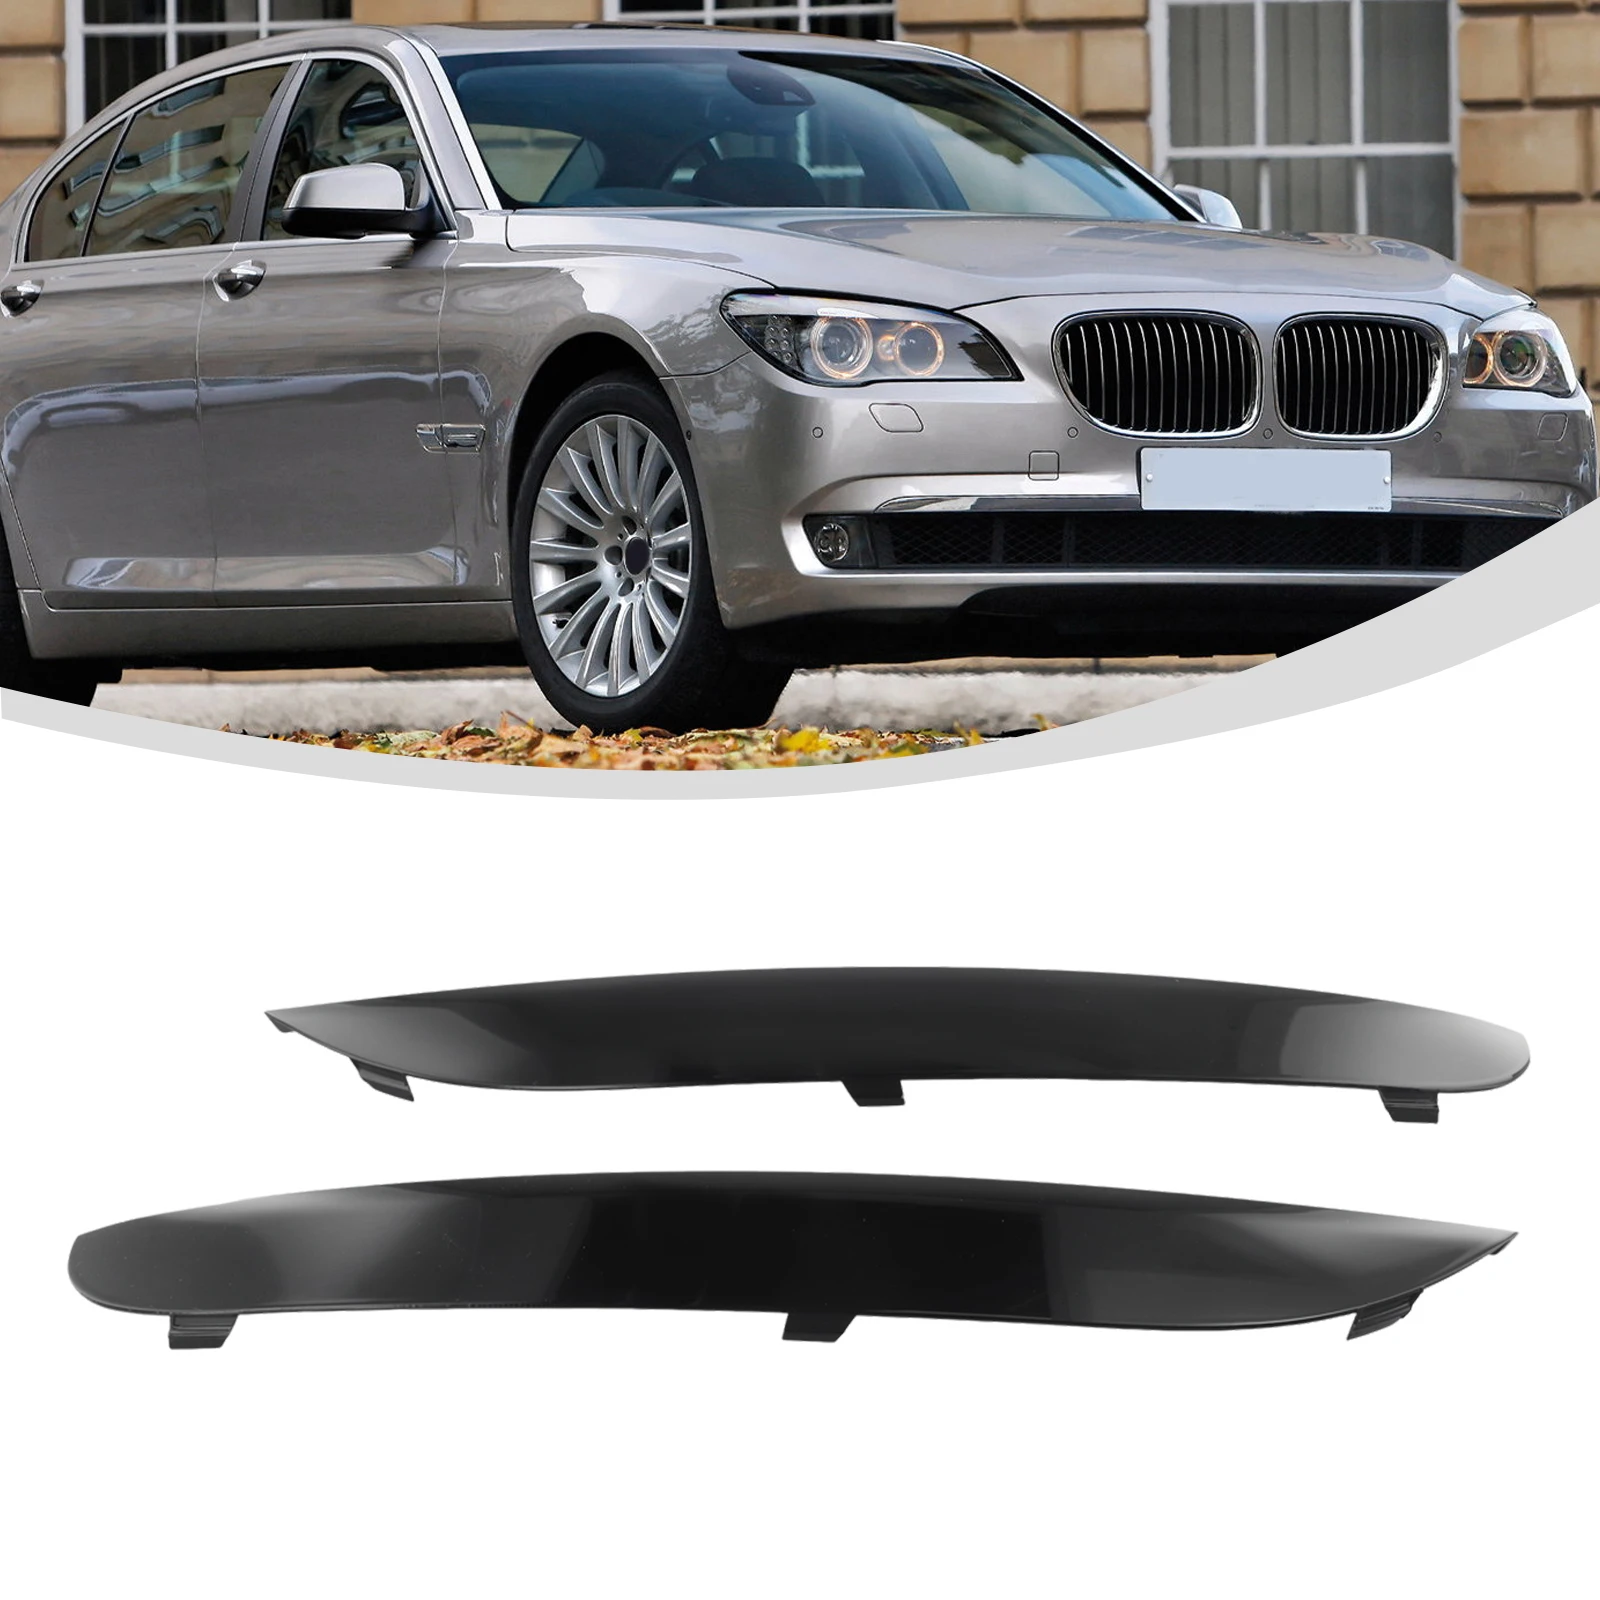 

Upgrade Your For BMW 7 F01 F02 F04 with Quick Installation Front Bumper Grill Moulding Trim Set Enhance the Style of Your Car